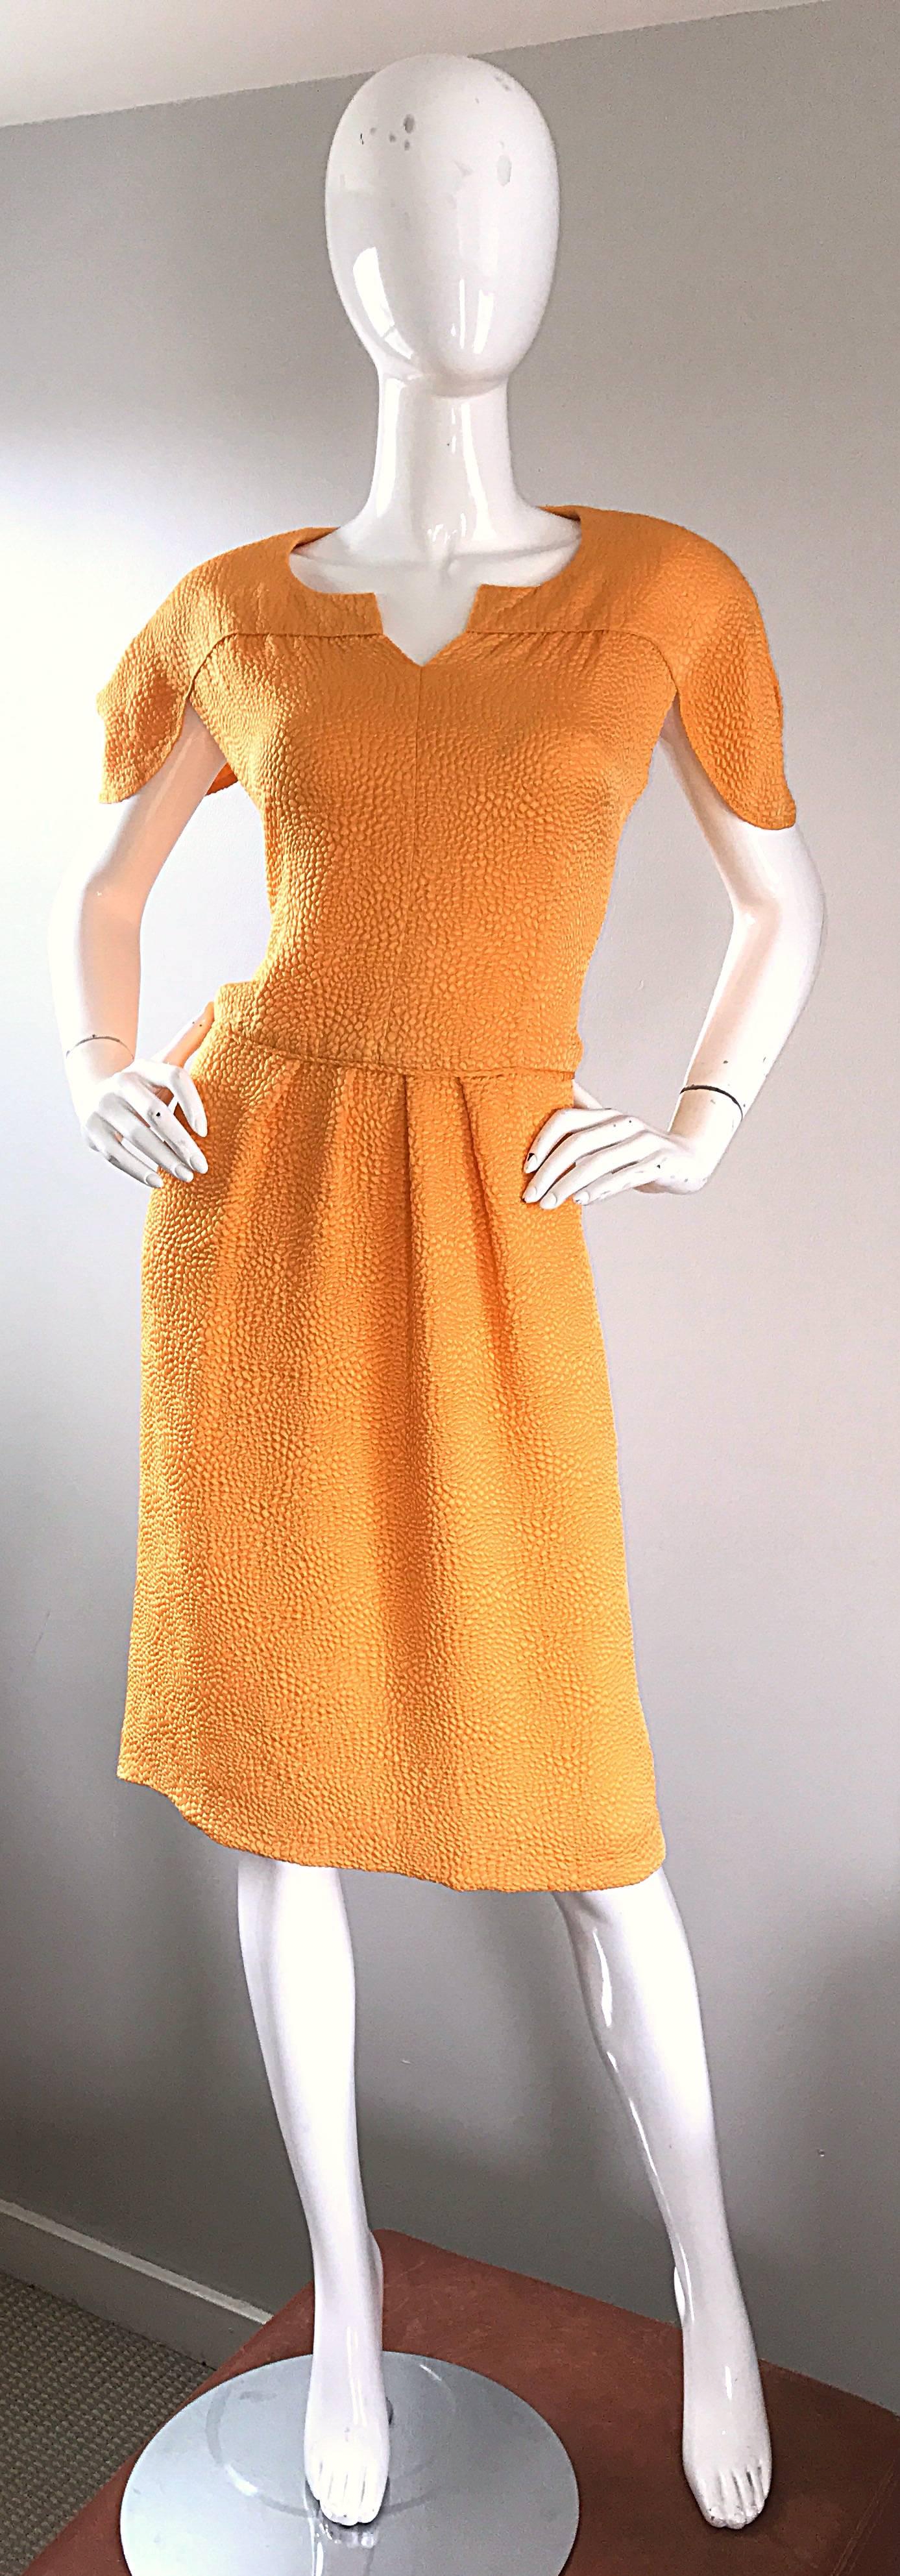 New with original $4,200 price tag from NEIMAN MARCUS! Beautiful vintage 90s RIPETTA ROMA marigold yellow silk short sleeve dress! Features textured silk. Avant Garde petal sleeves. Hidden zipper up the back with hook-and-eye closure. Built in